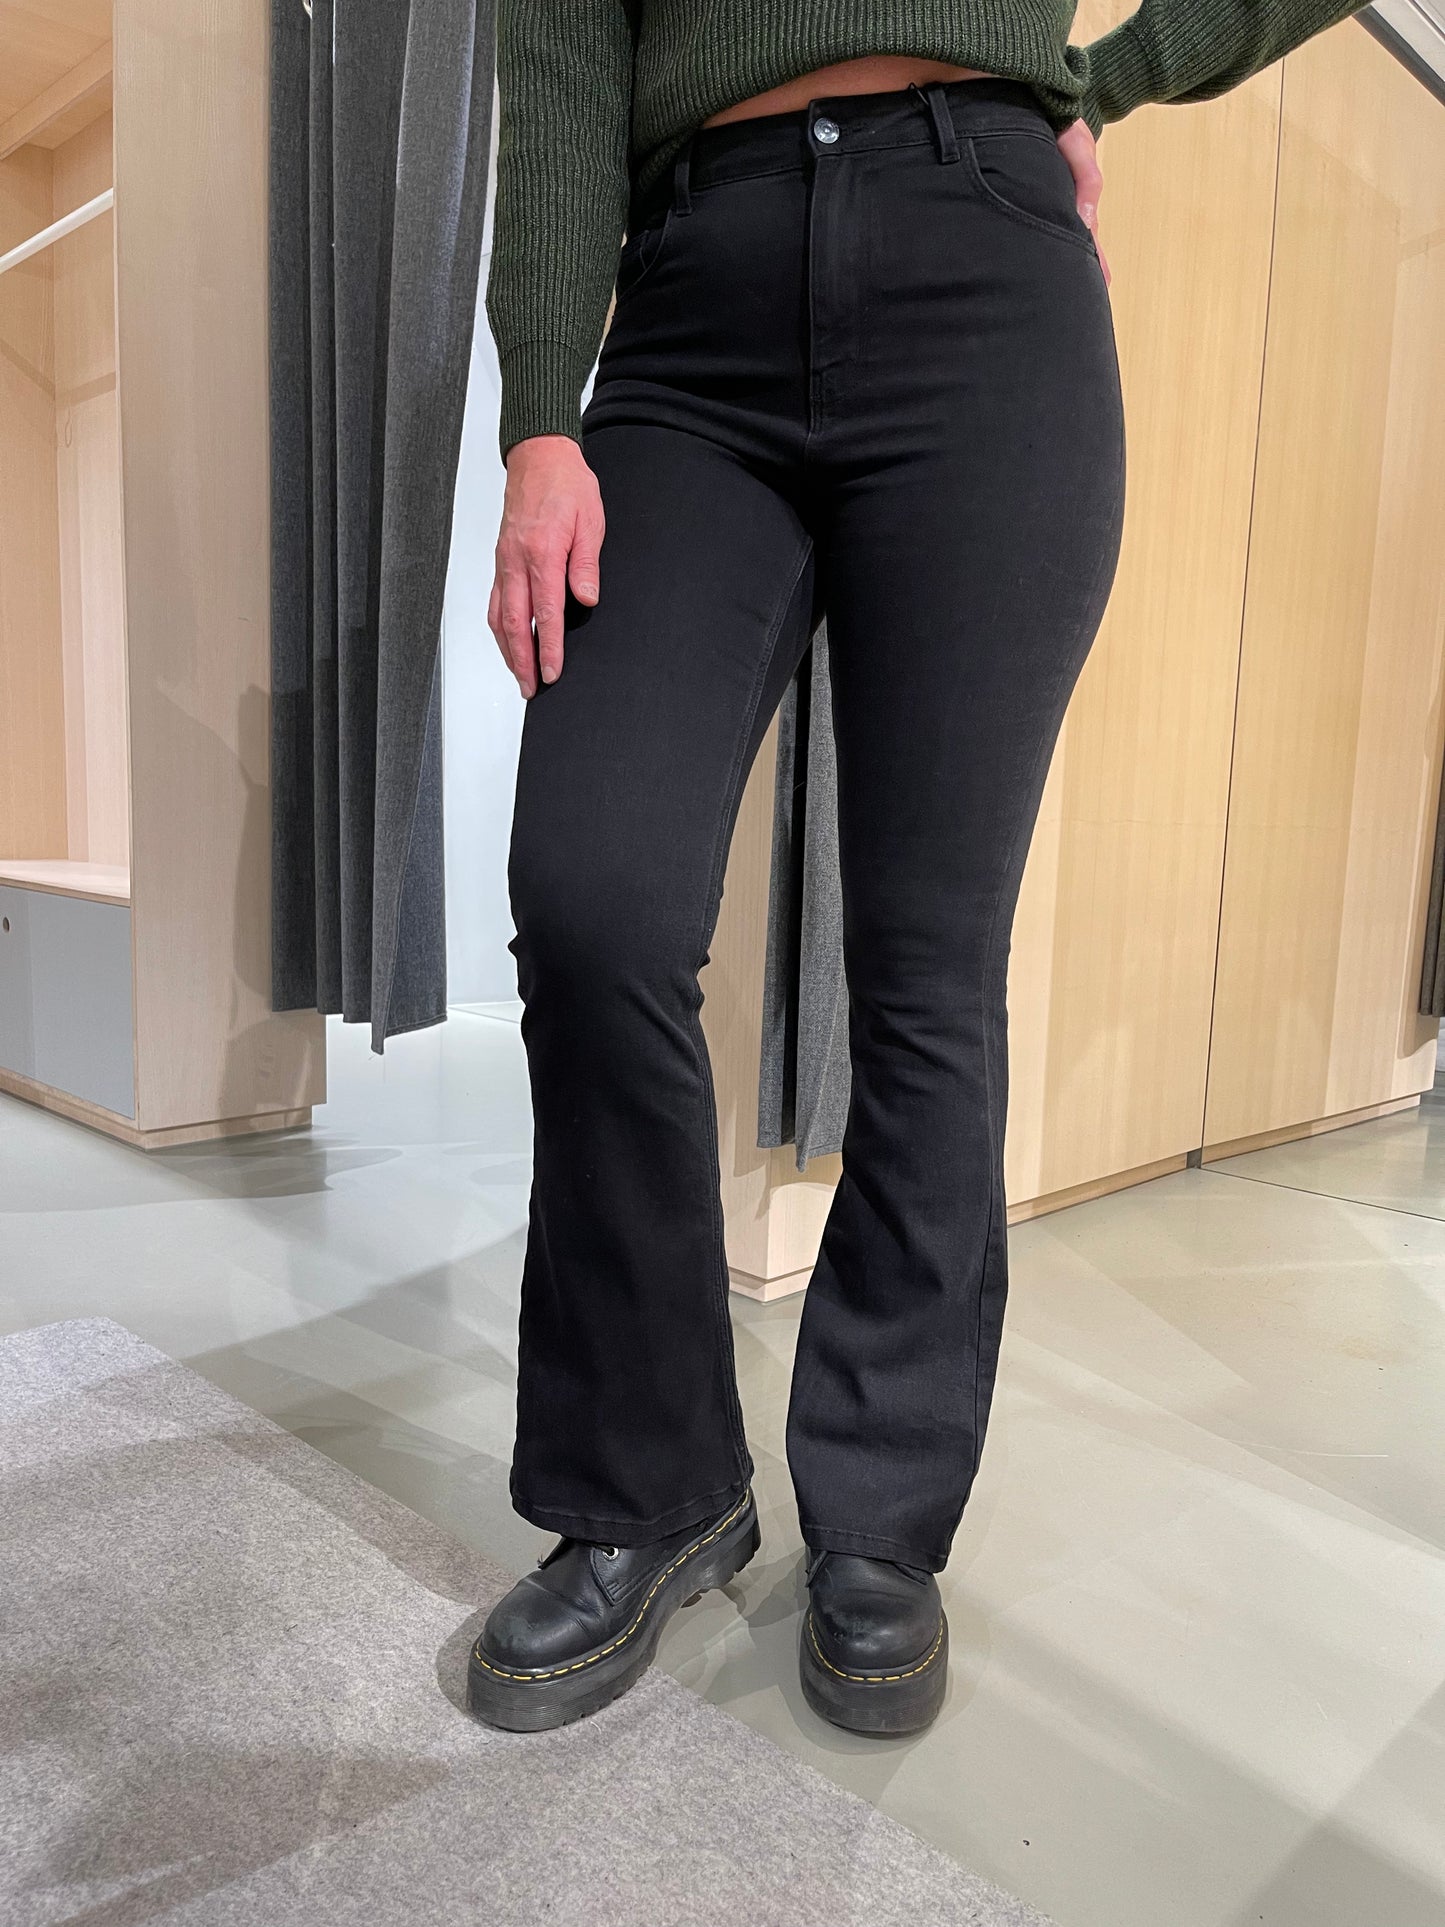 PCPEGGY Jeans - Black